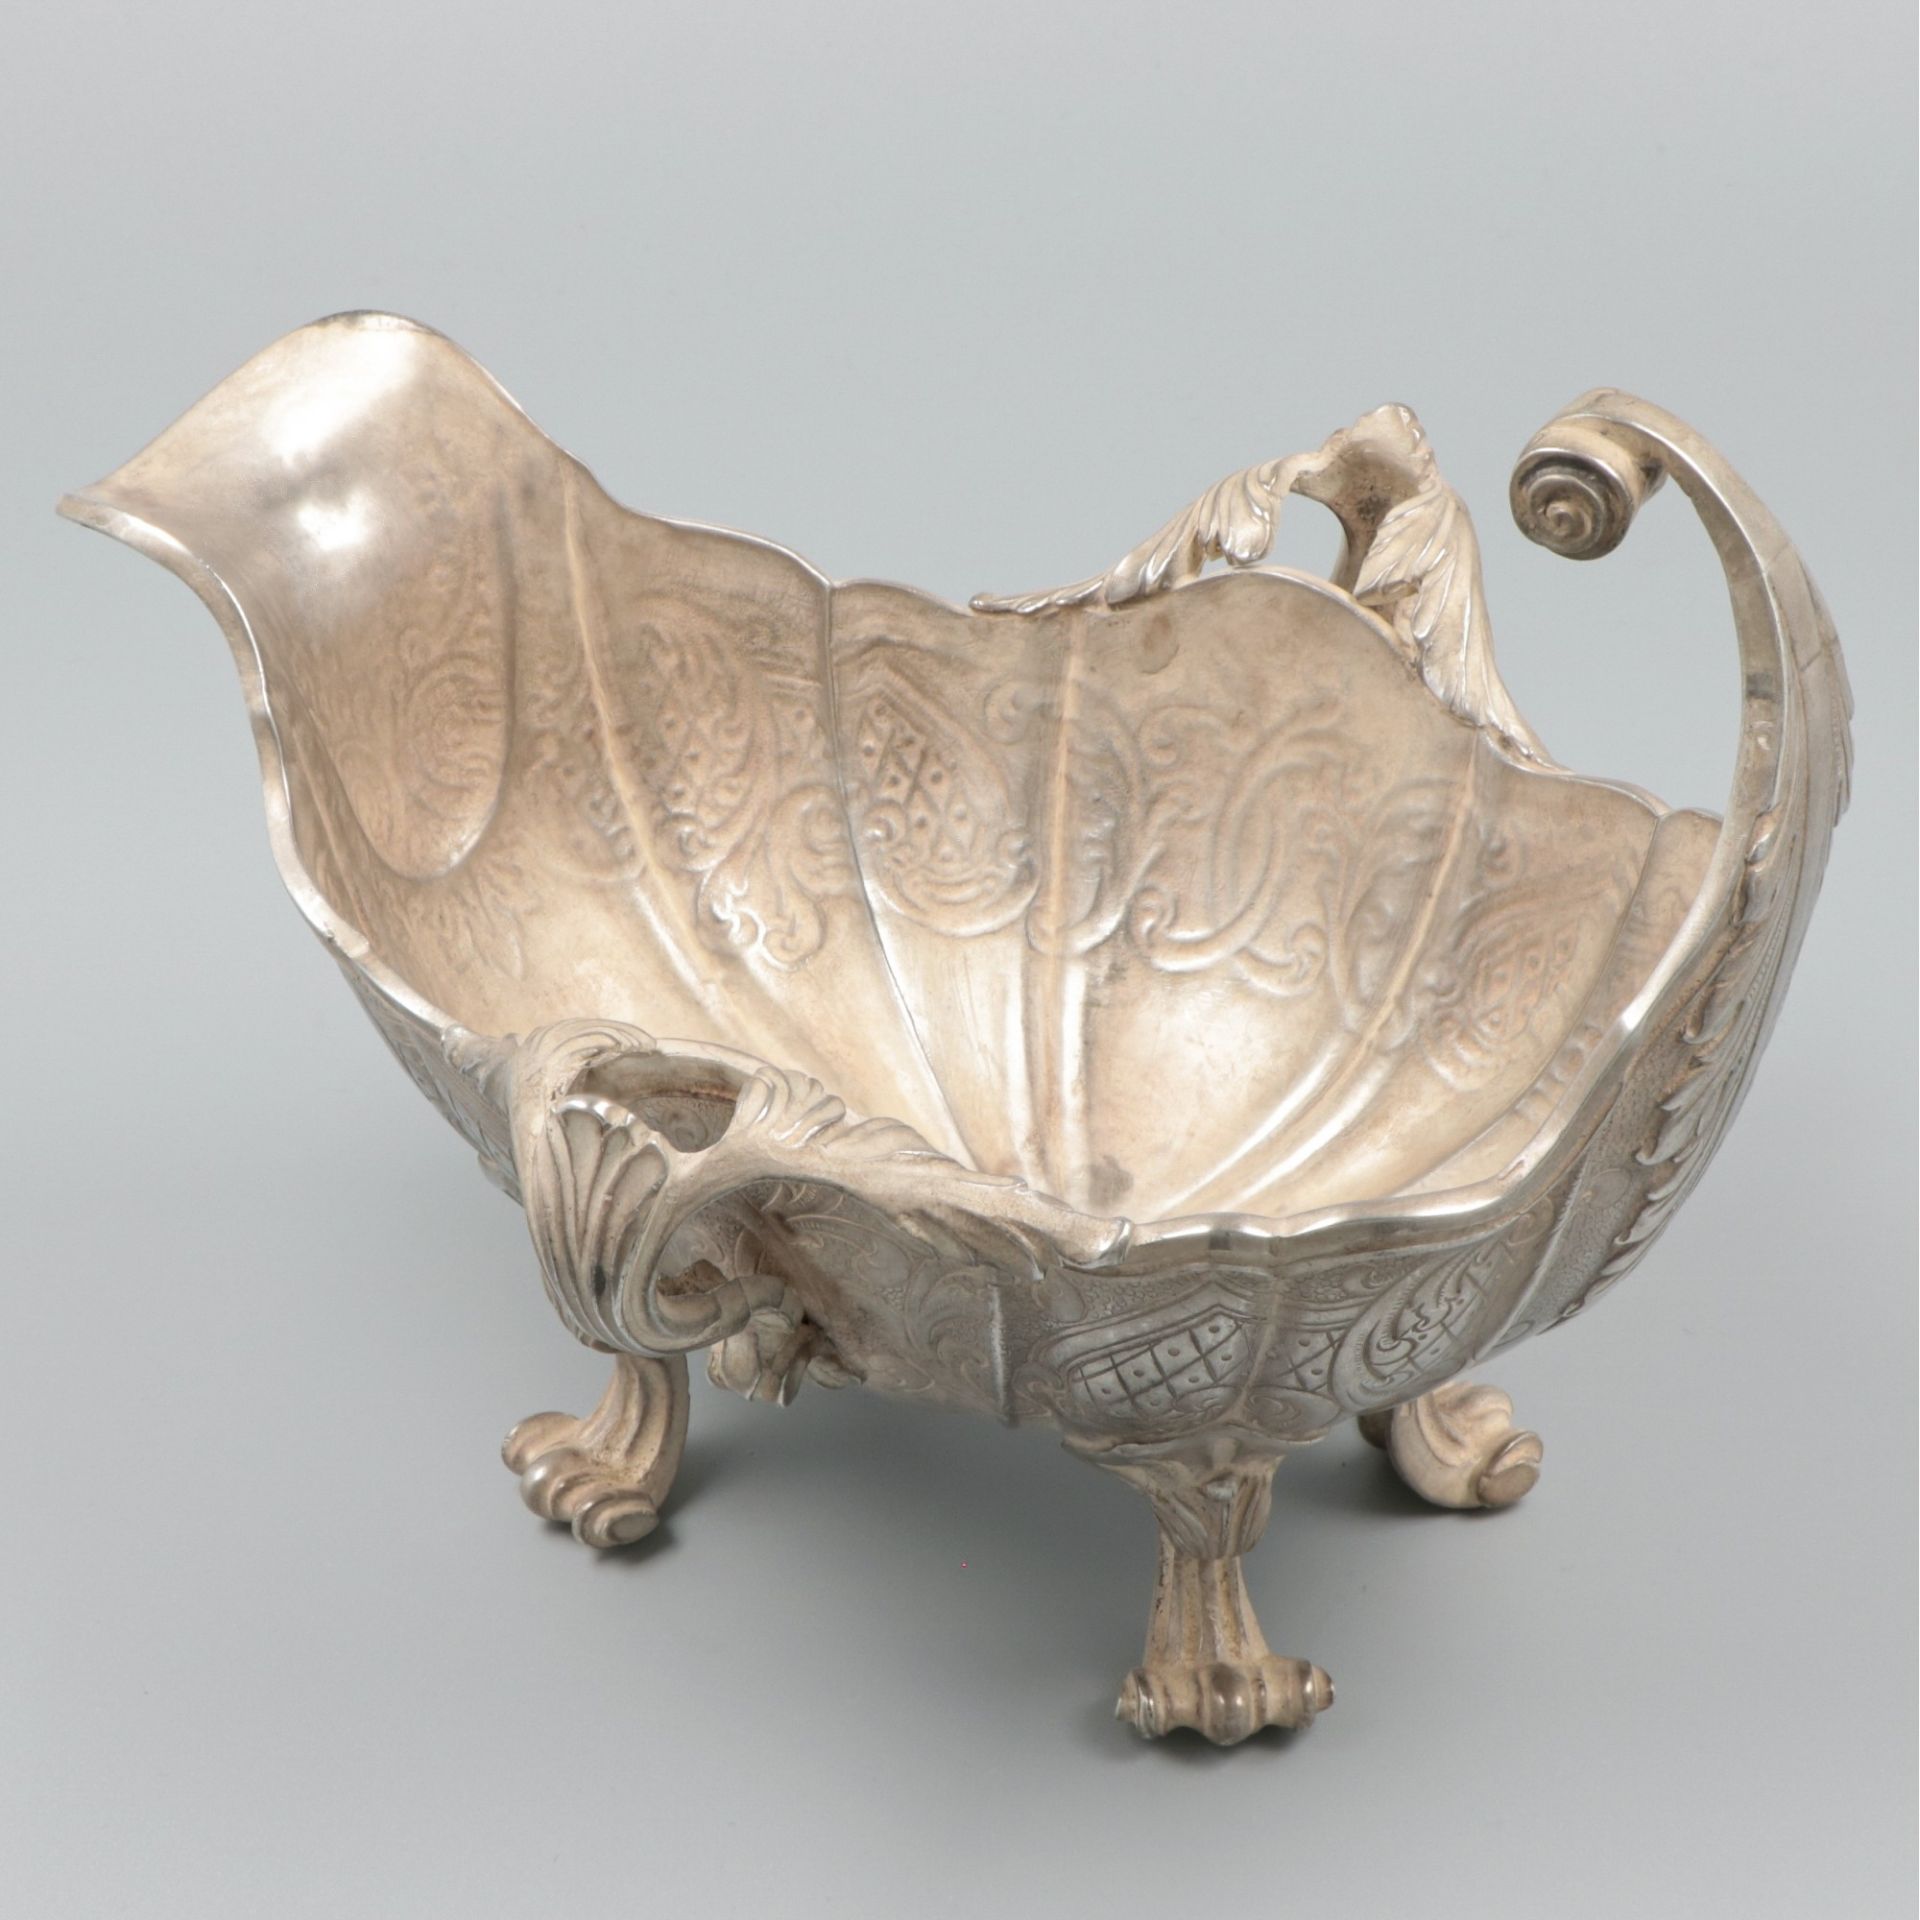 Saucière / sauce boat silver. - Image 2 of 9